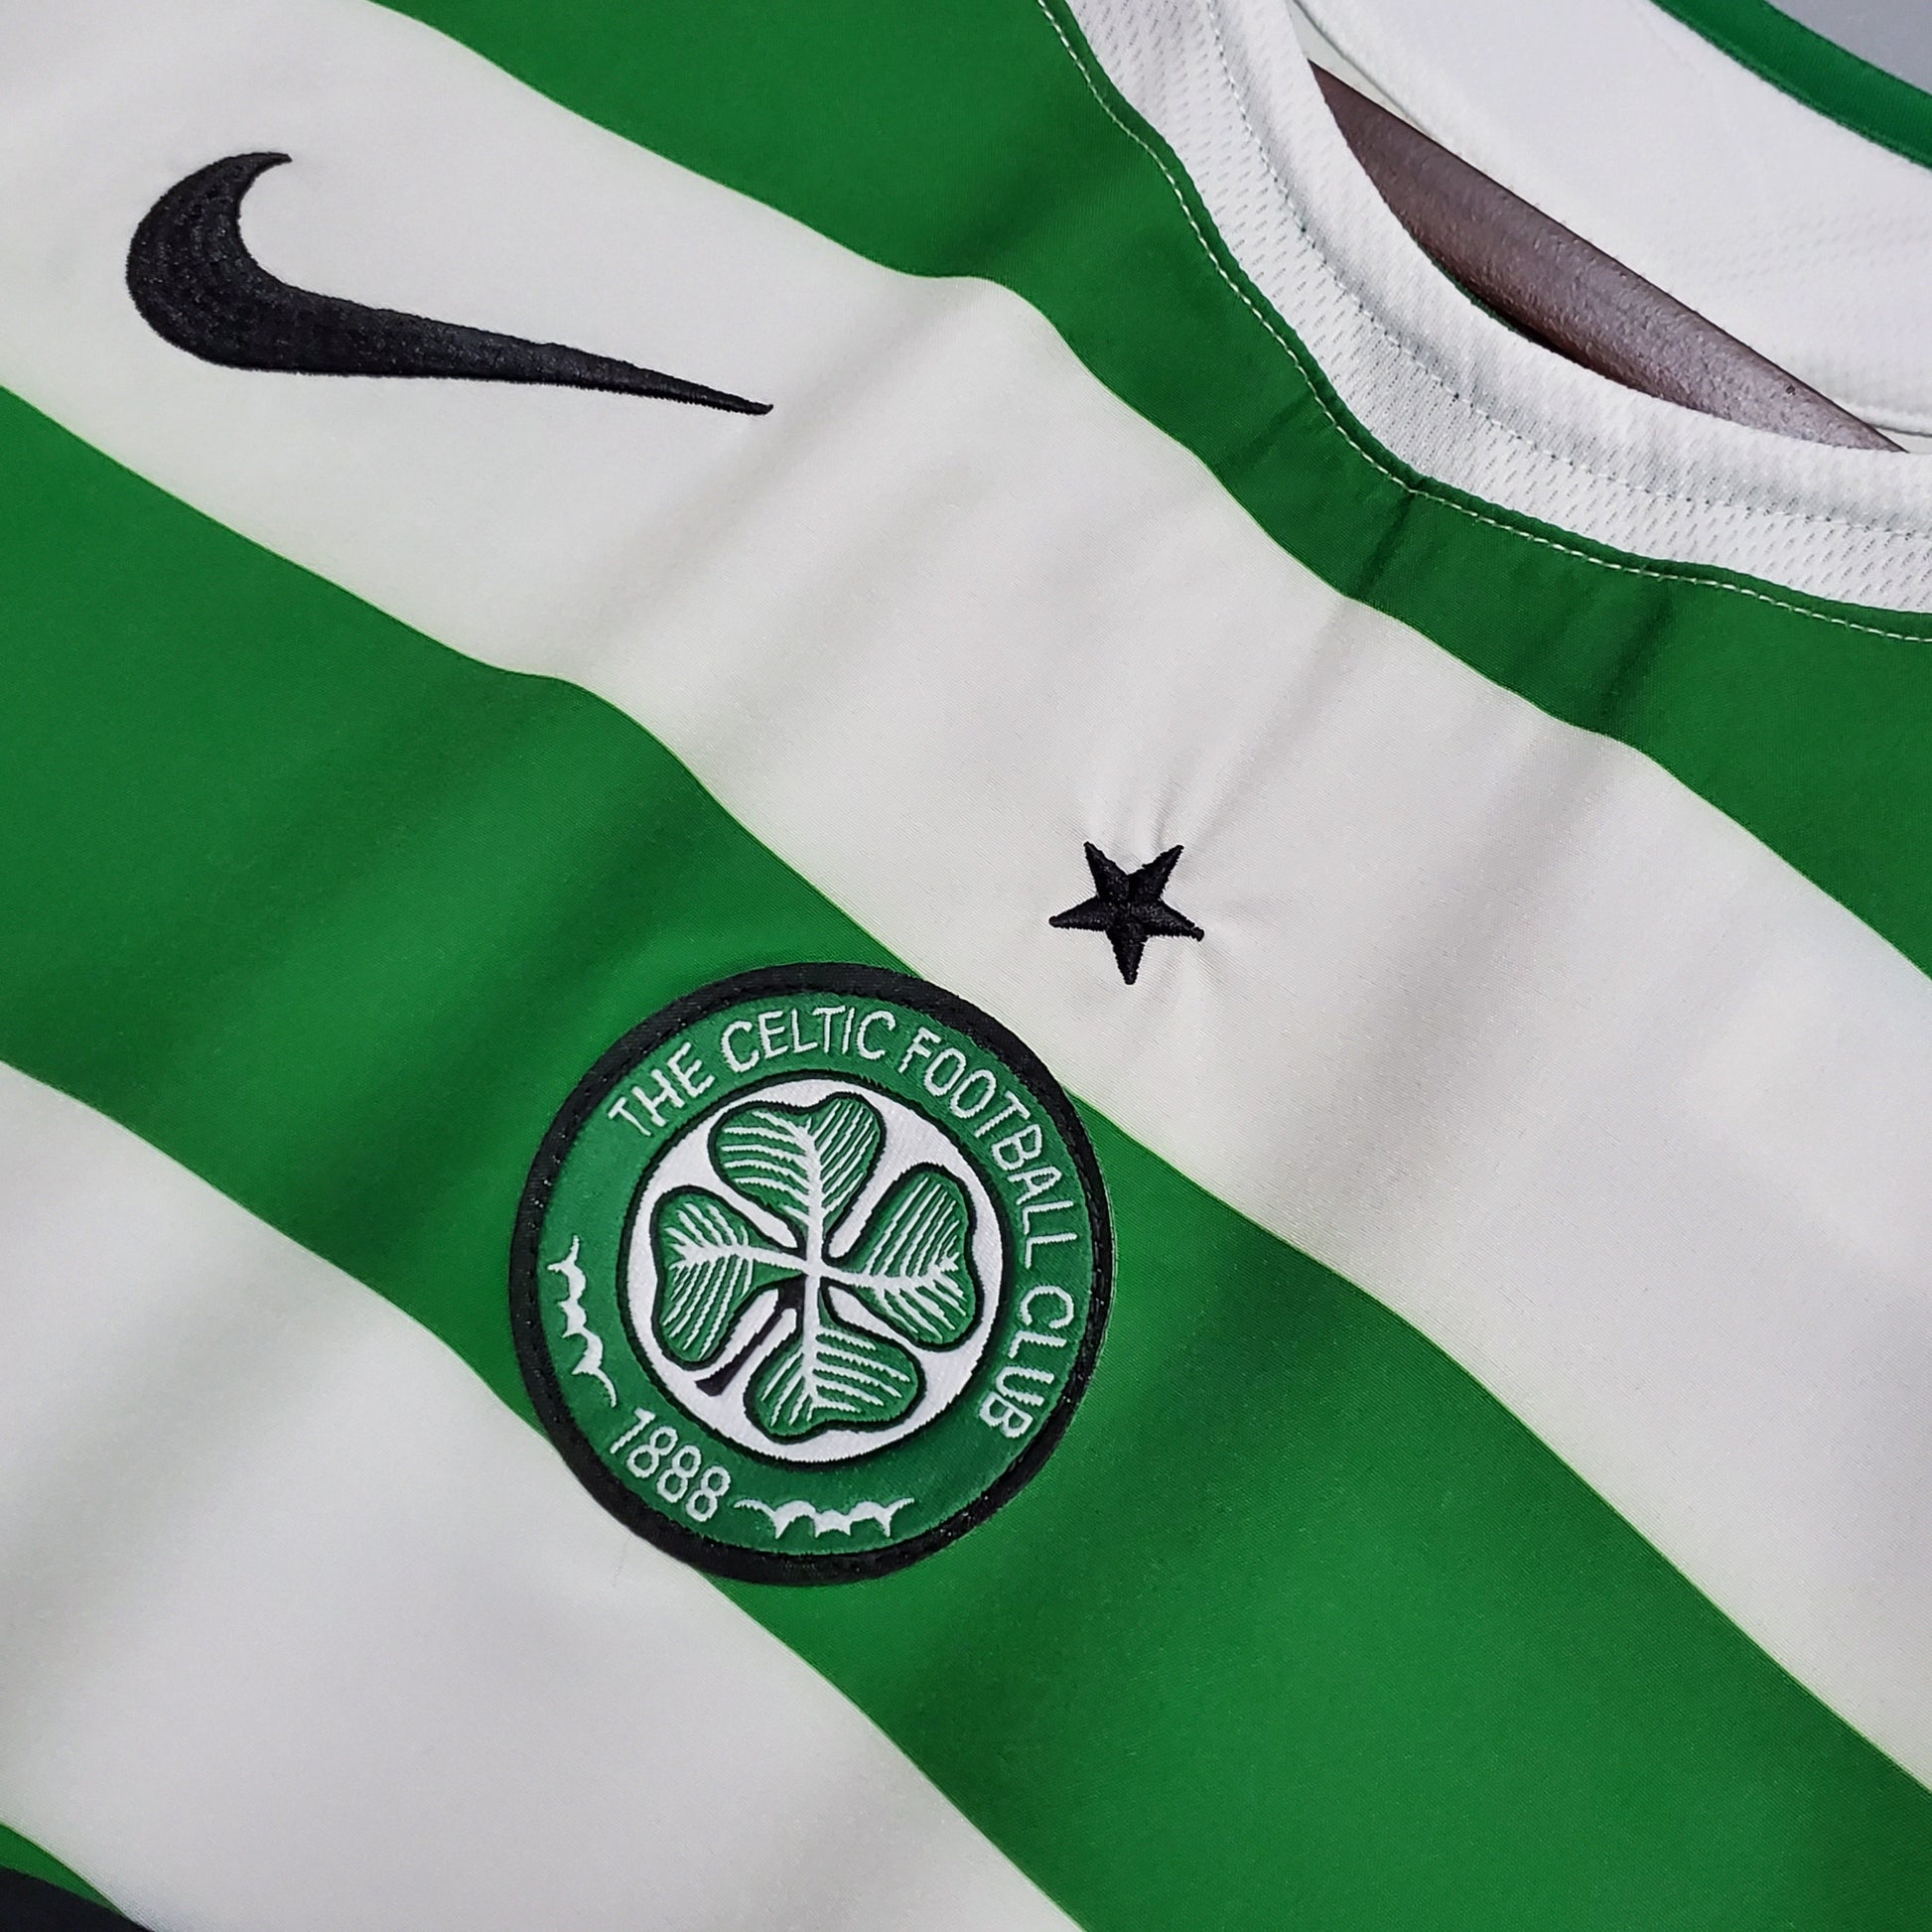 Celtic Home football shirt 2005 - 2007. Sponsored by Carling